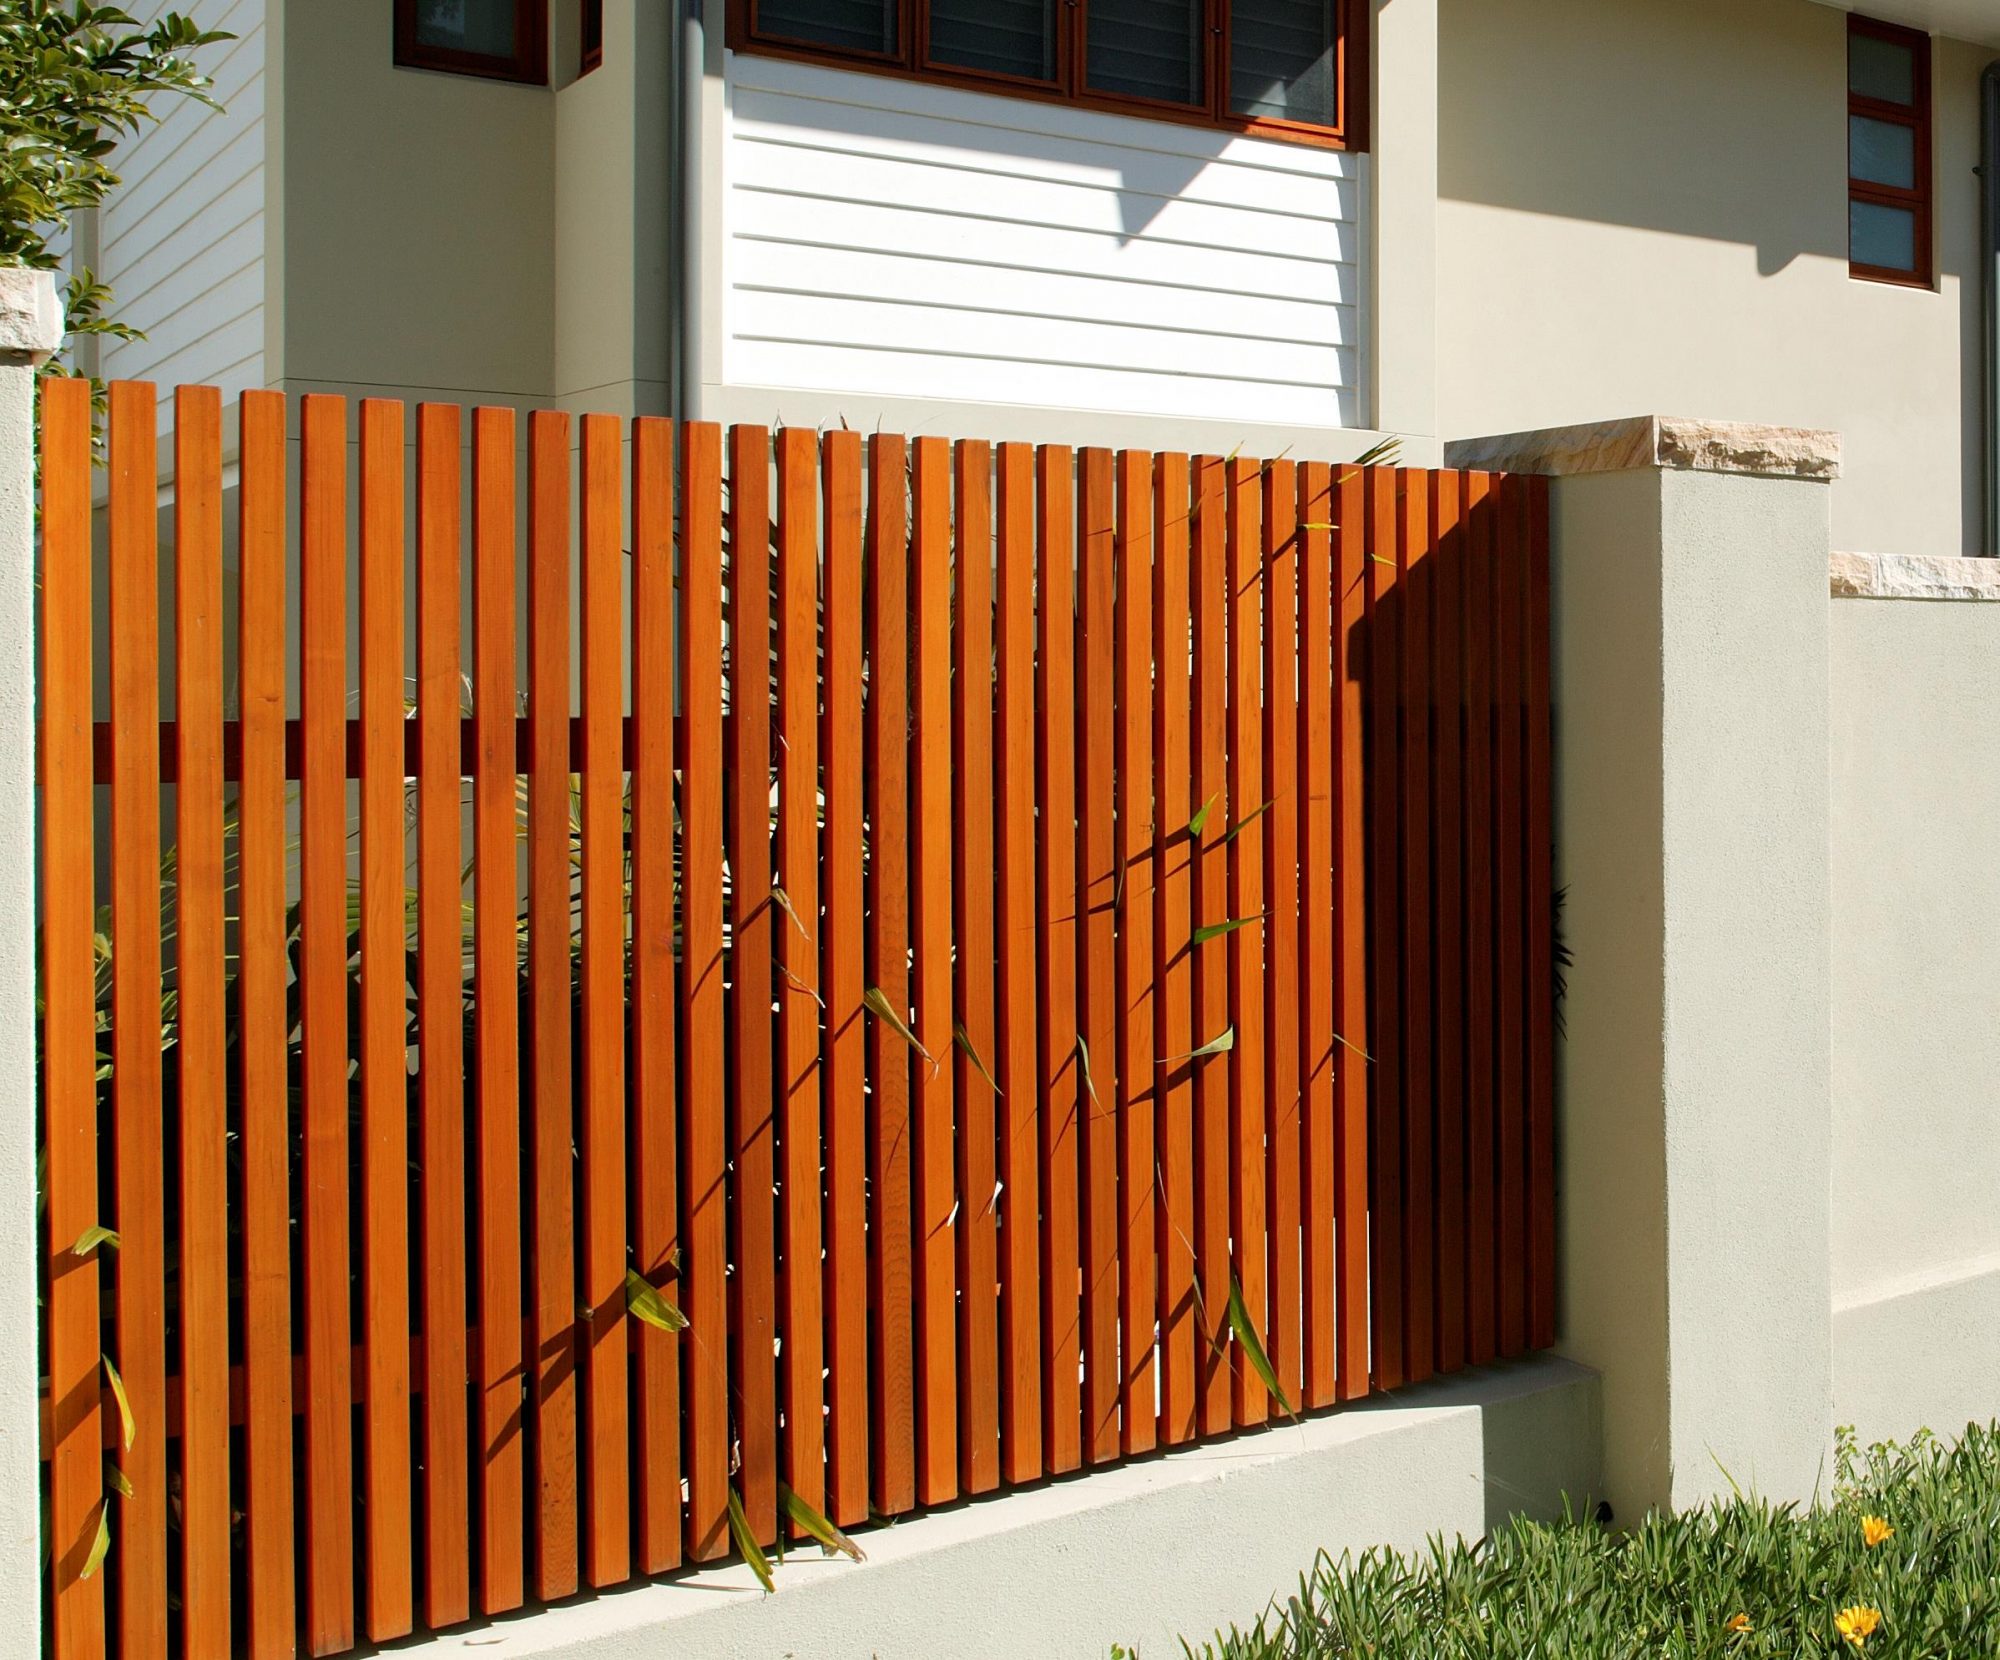 Protect timber fences from the elements with Sikkens range of wood coatings and timber stains